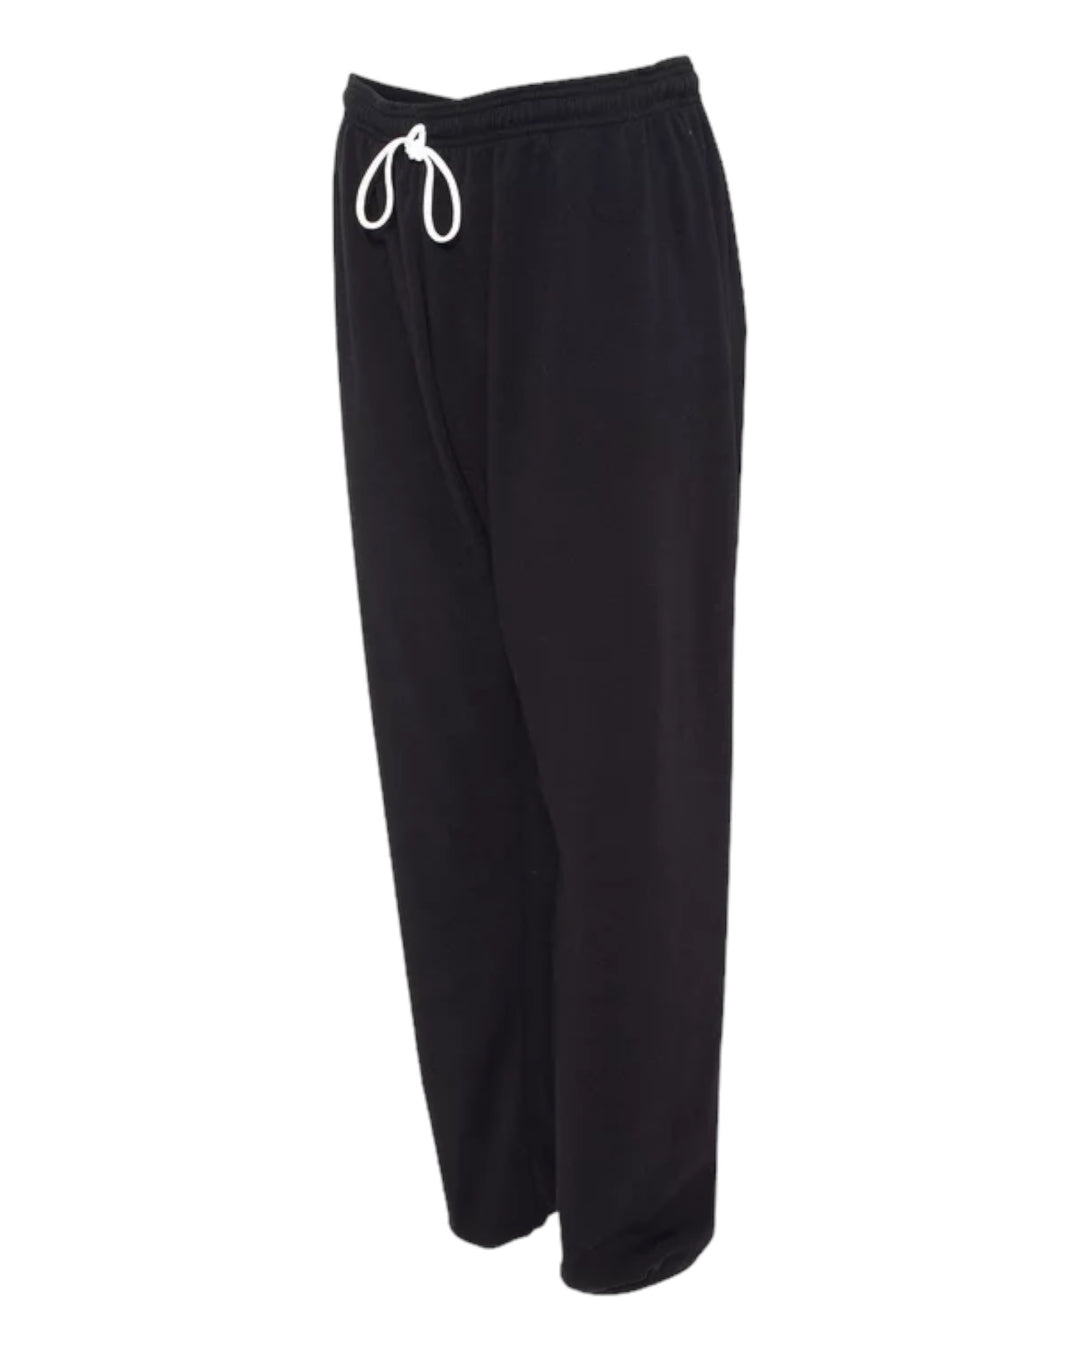 Flowery Peace Sign Sweatpants- Pink